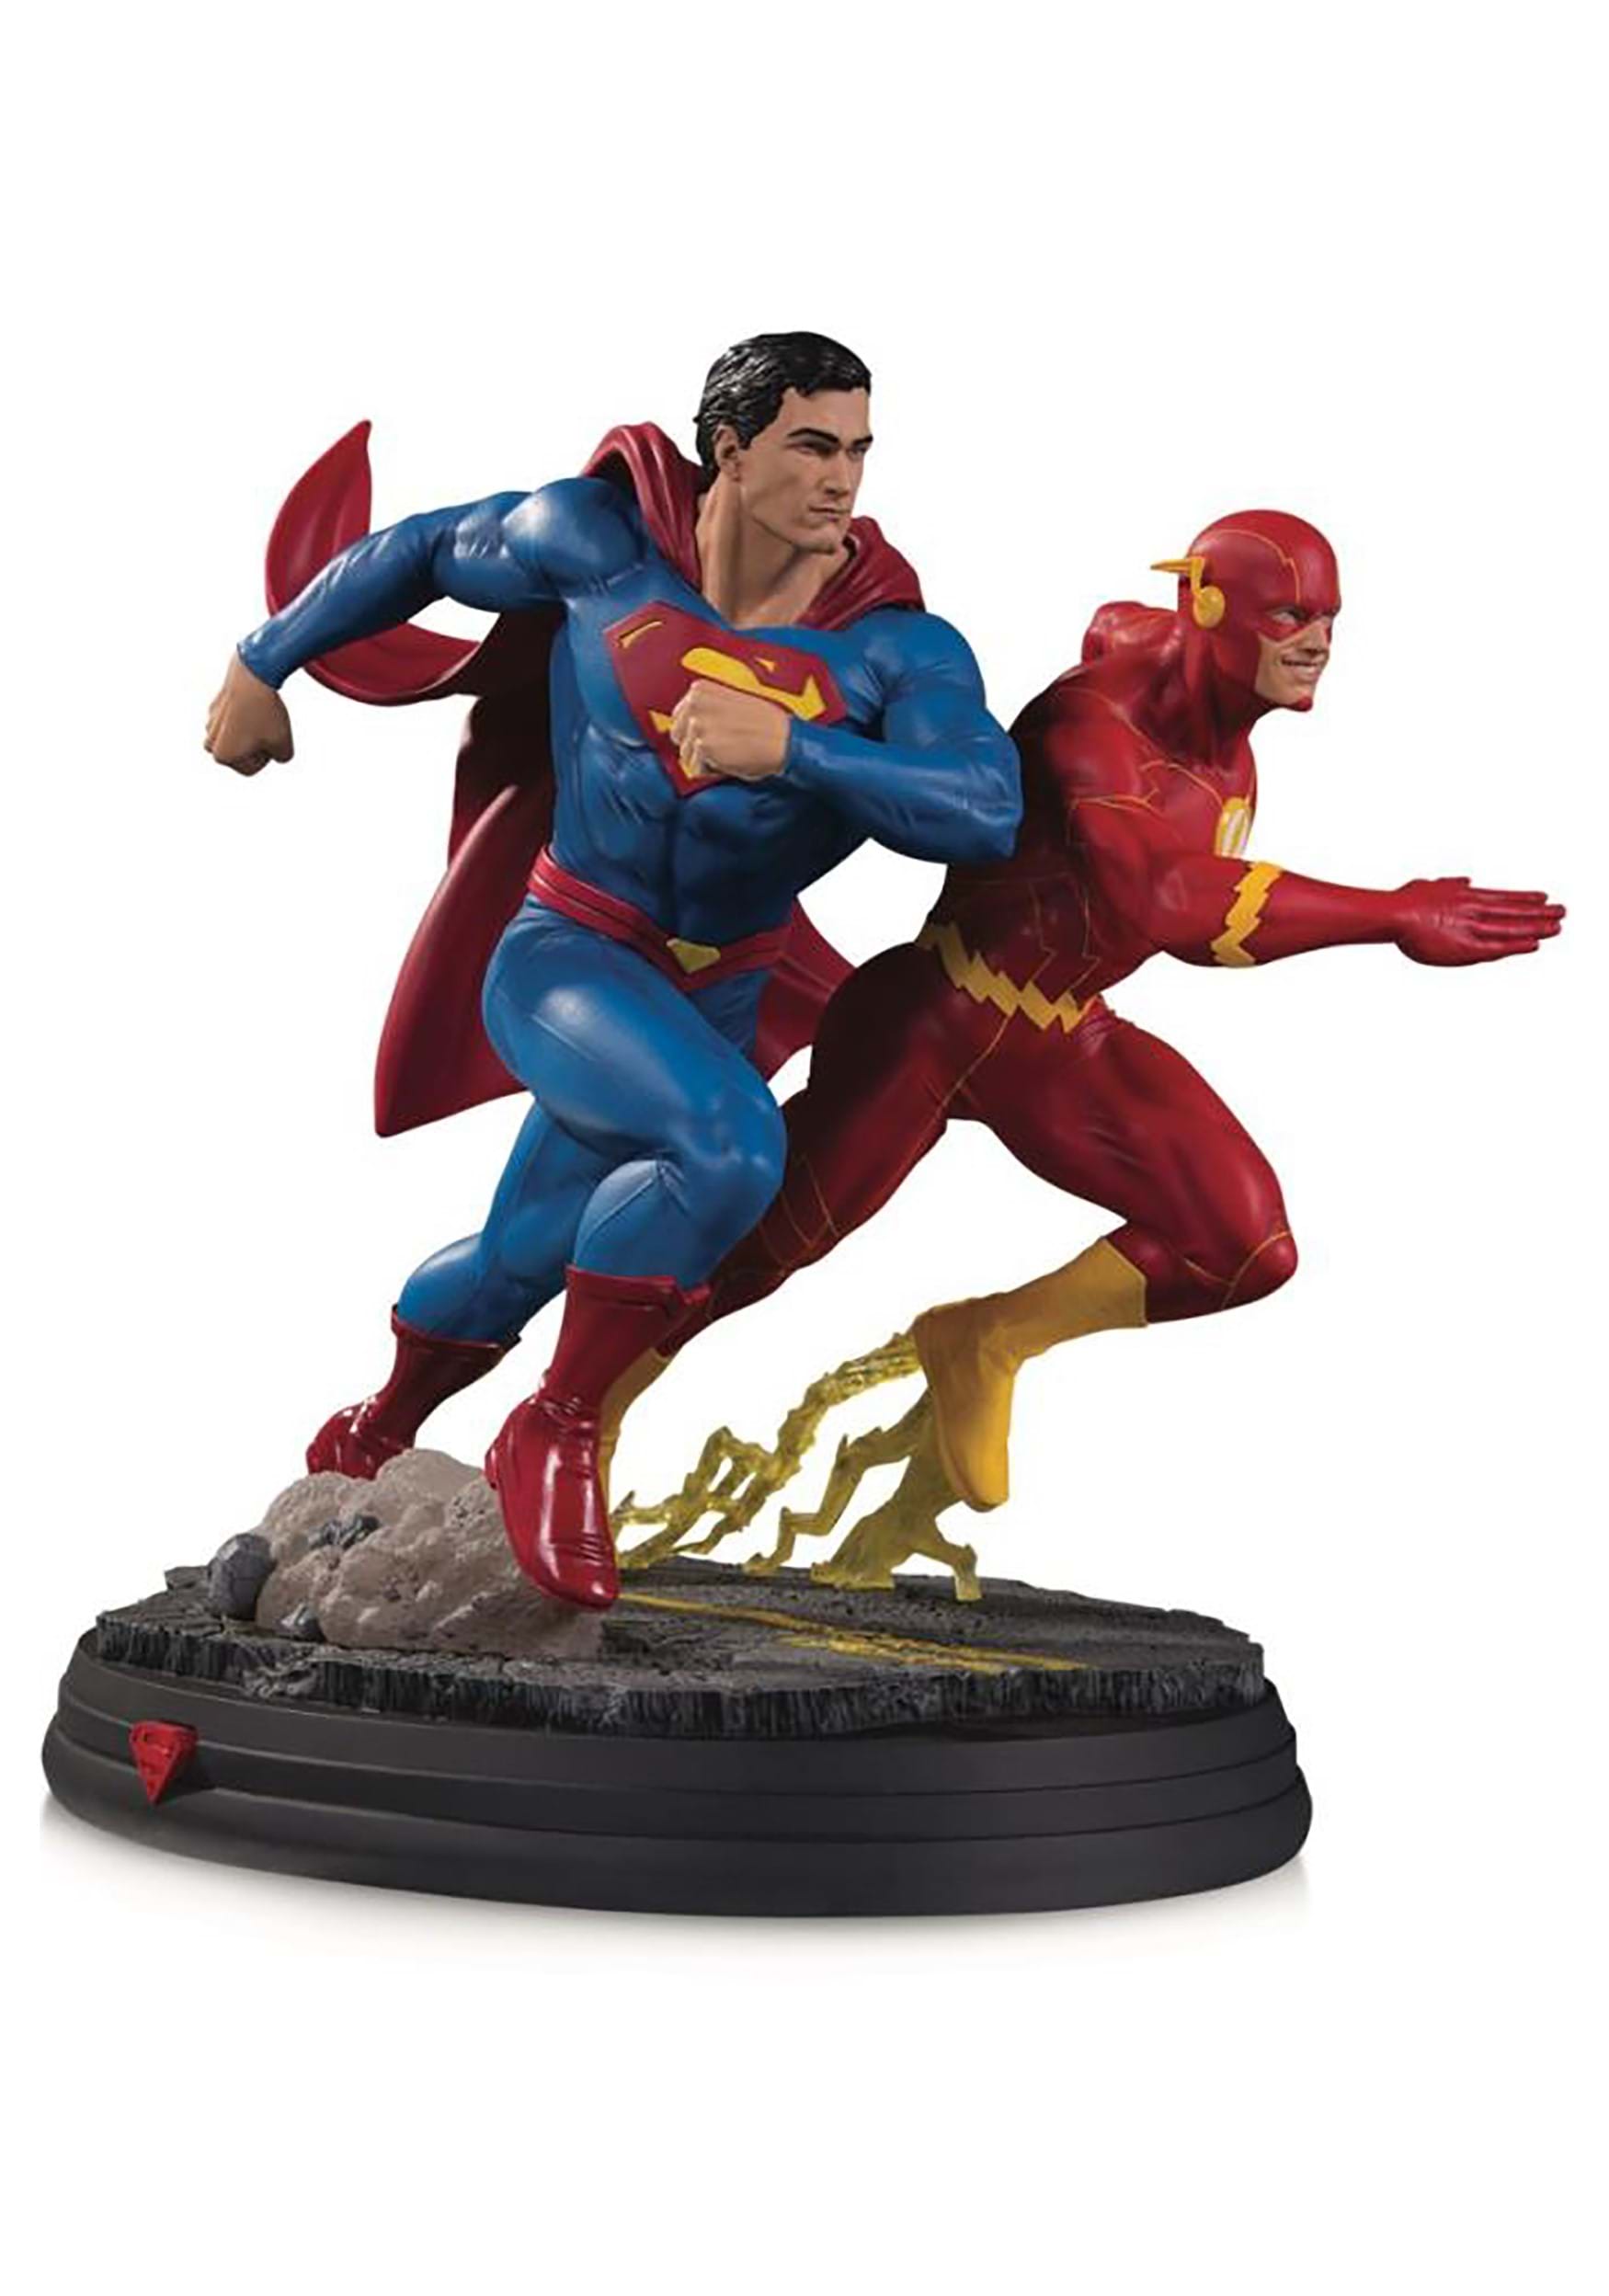 DC Gallery Superman Vs. Flash Racing 2nd Edition Statue